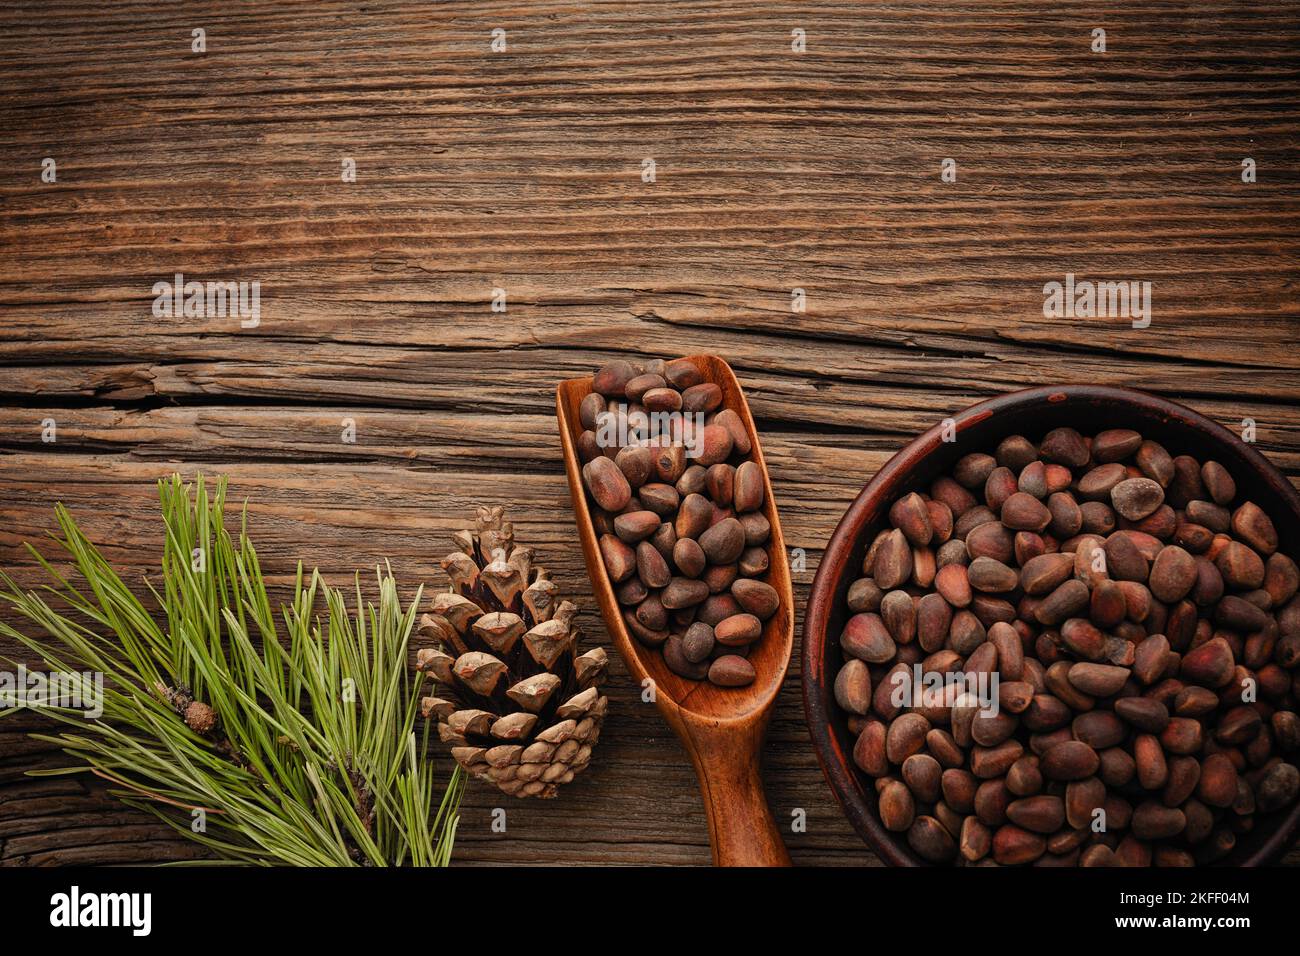 Siberian pine nuts and needles branch on a wooden table with a place for your text. Stock Photo